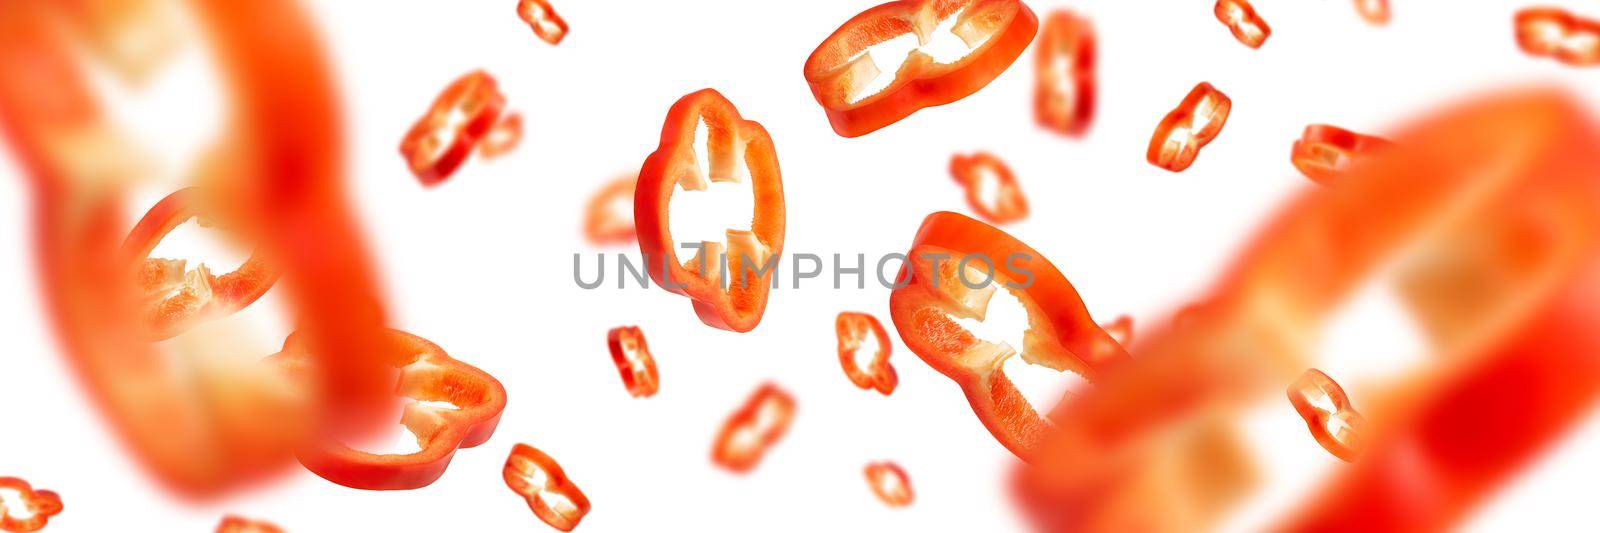 Red bell pepper cut into slices isolated on white background. Falling pepper slices in different sizes and with different directions. by SERSOL